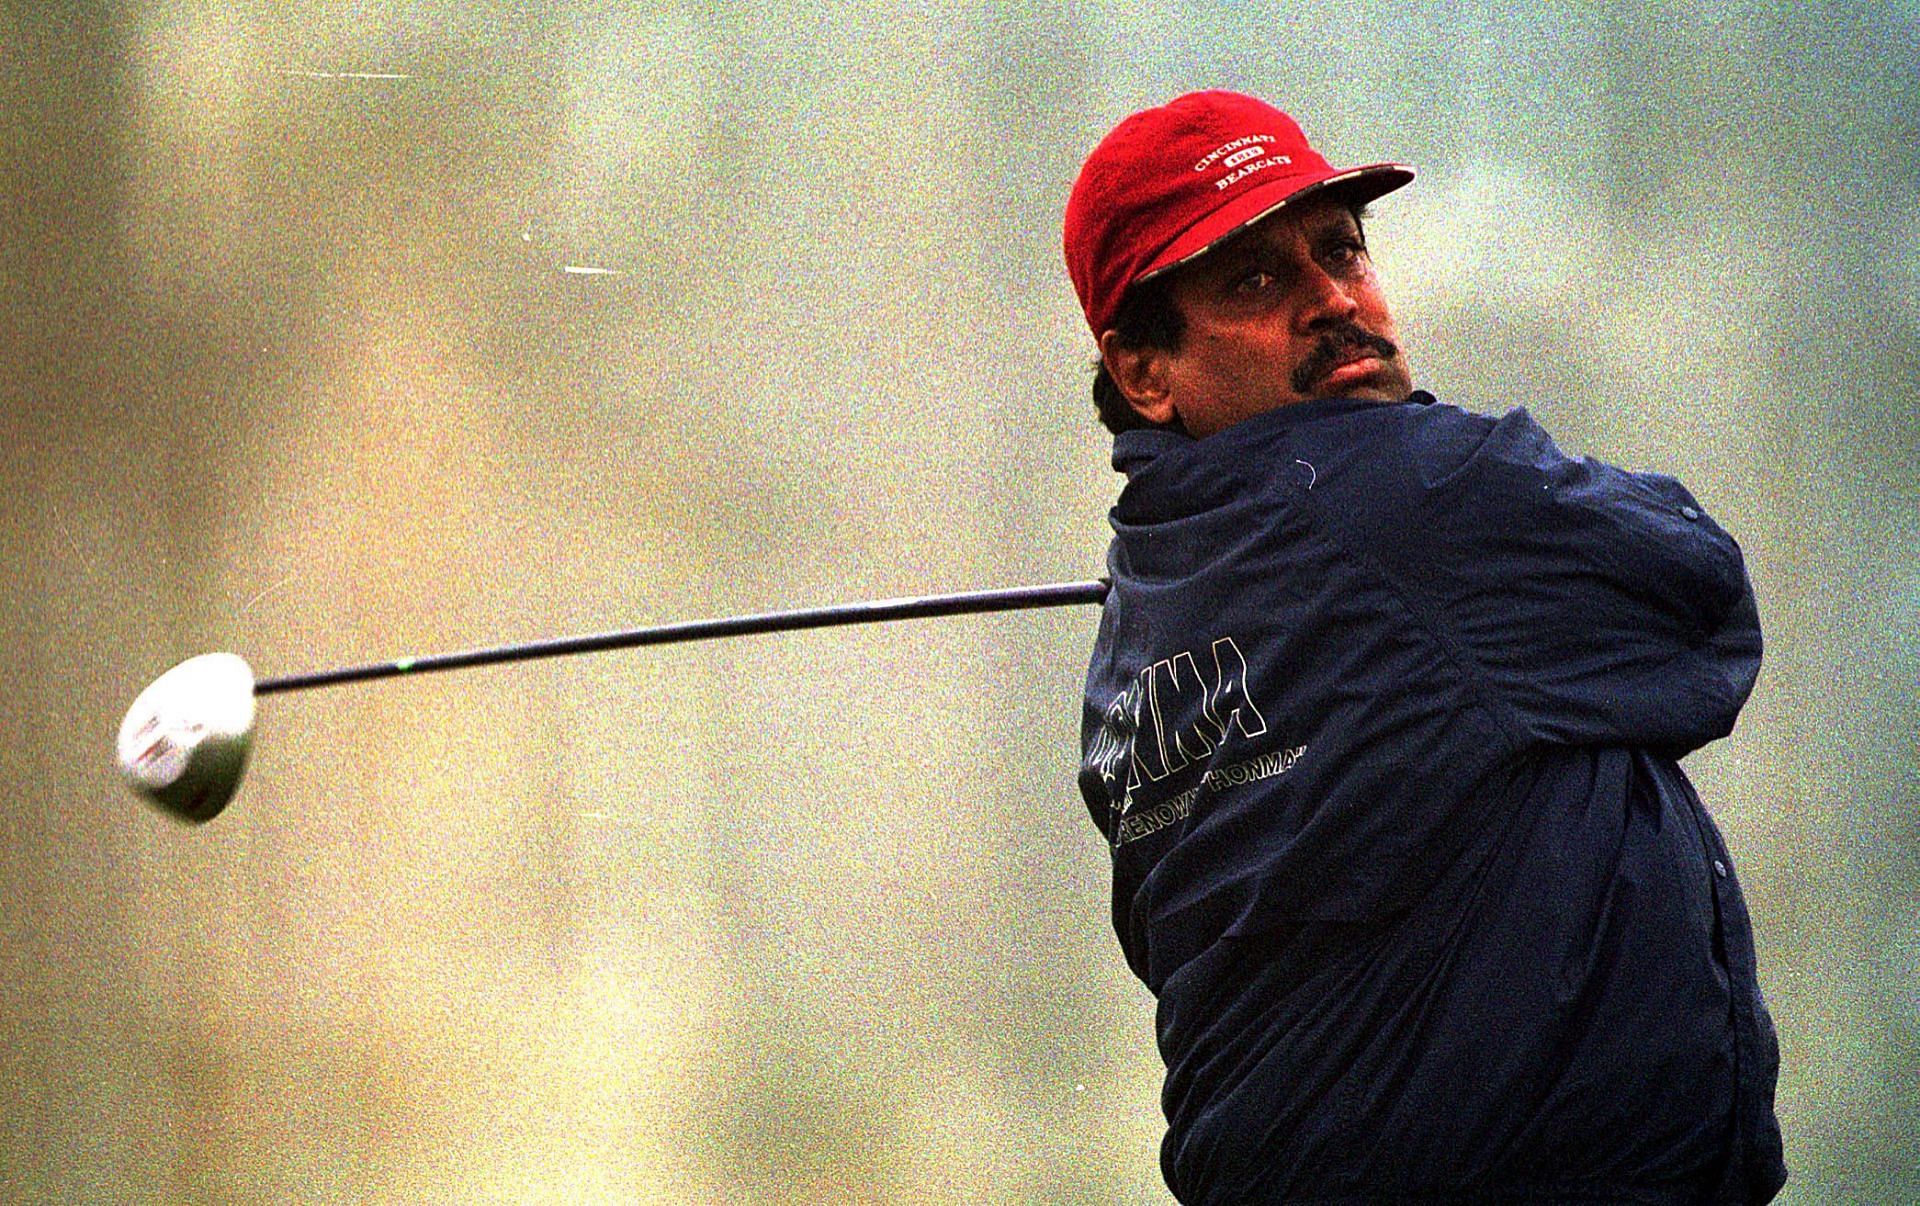 Kapil Dev has taken a liking to golf post retirement. Pic: Getty Images